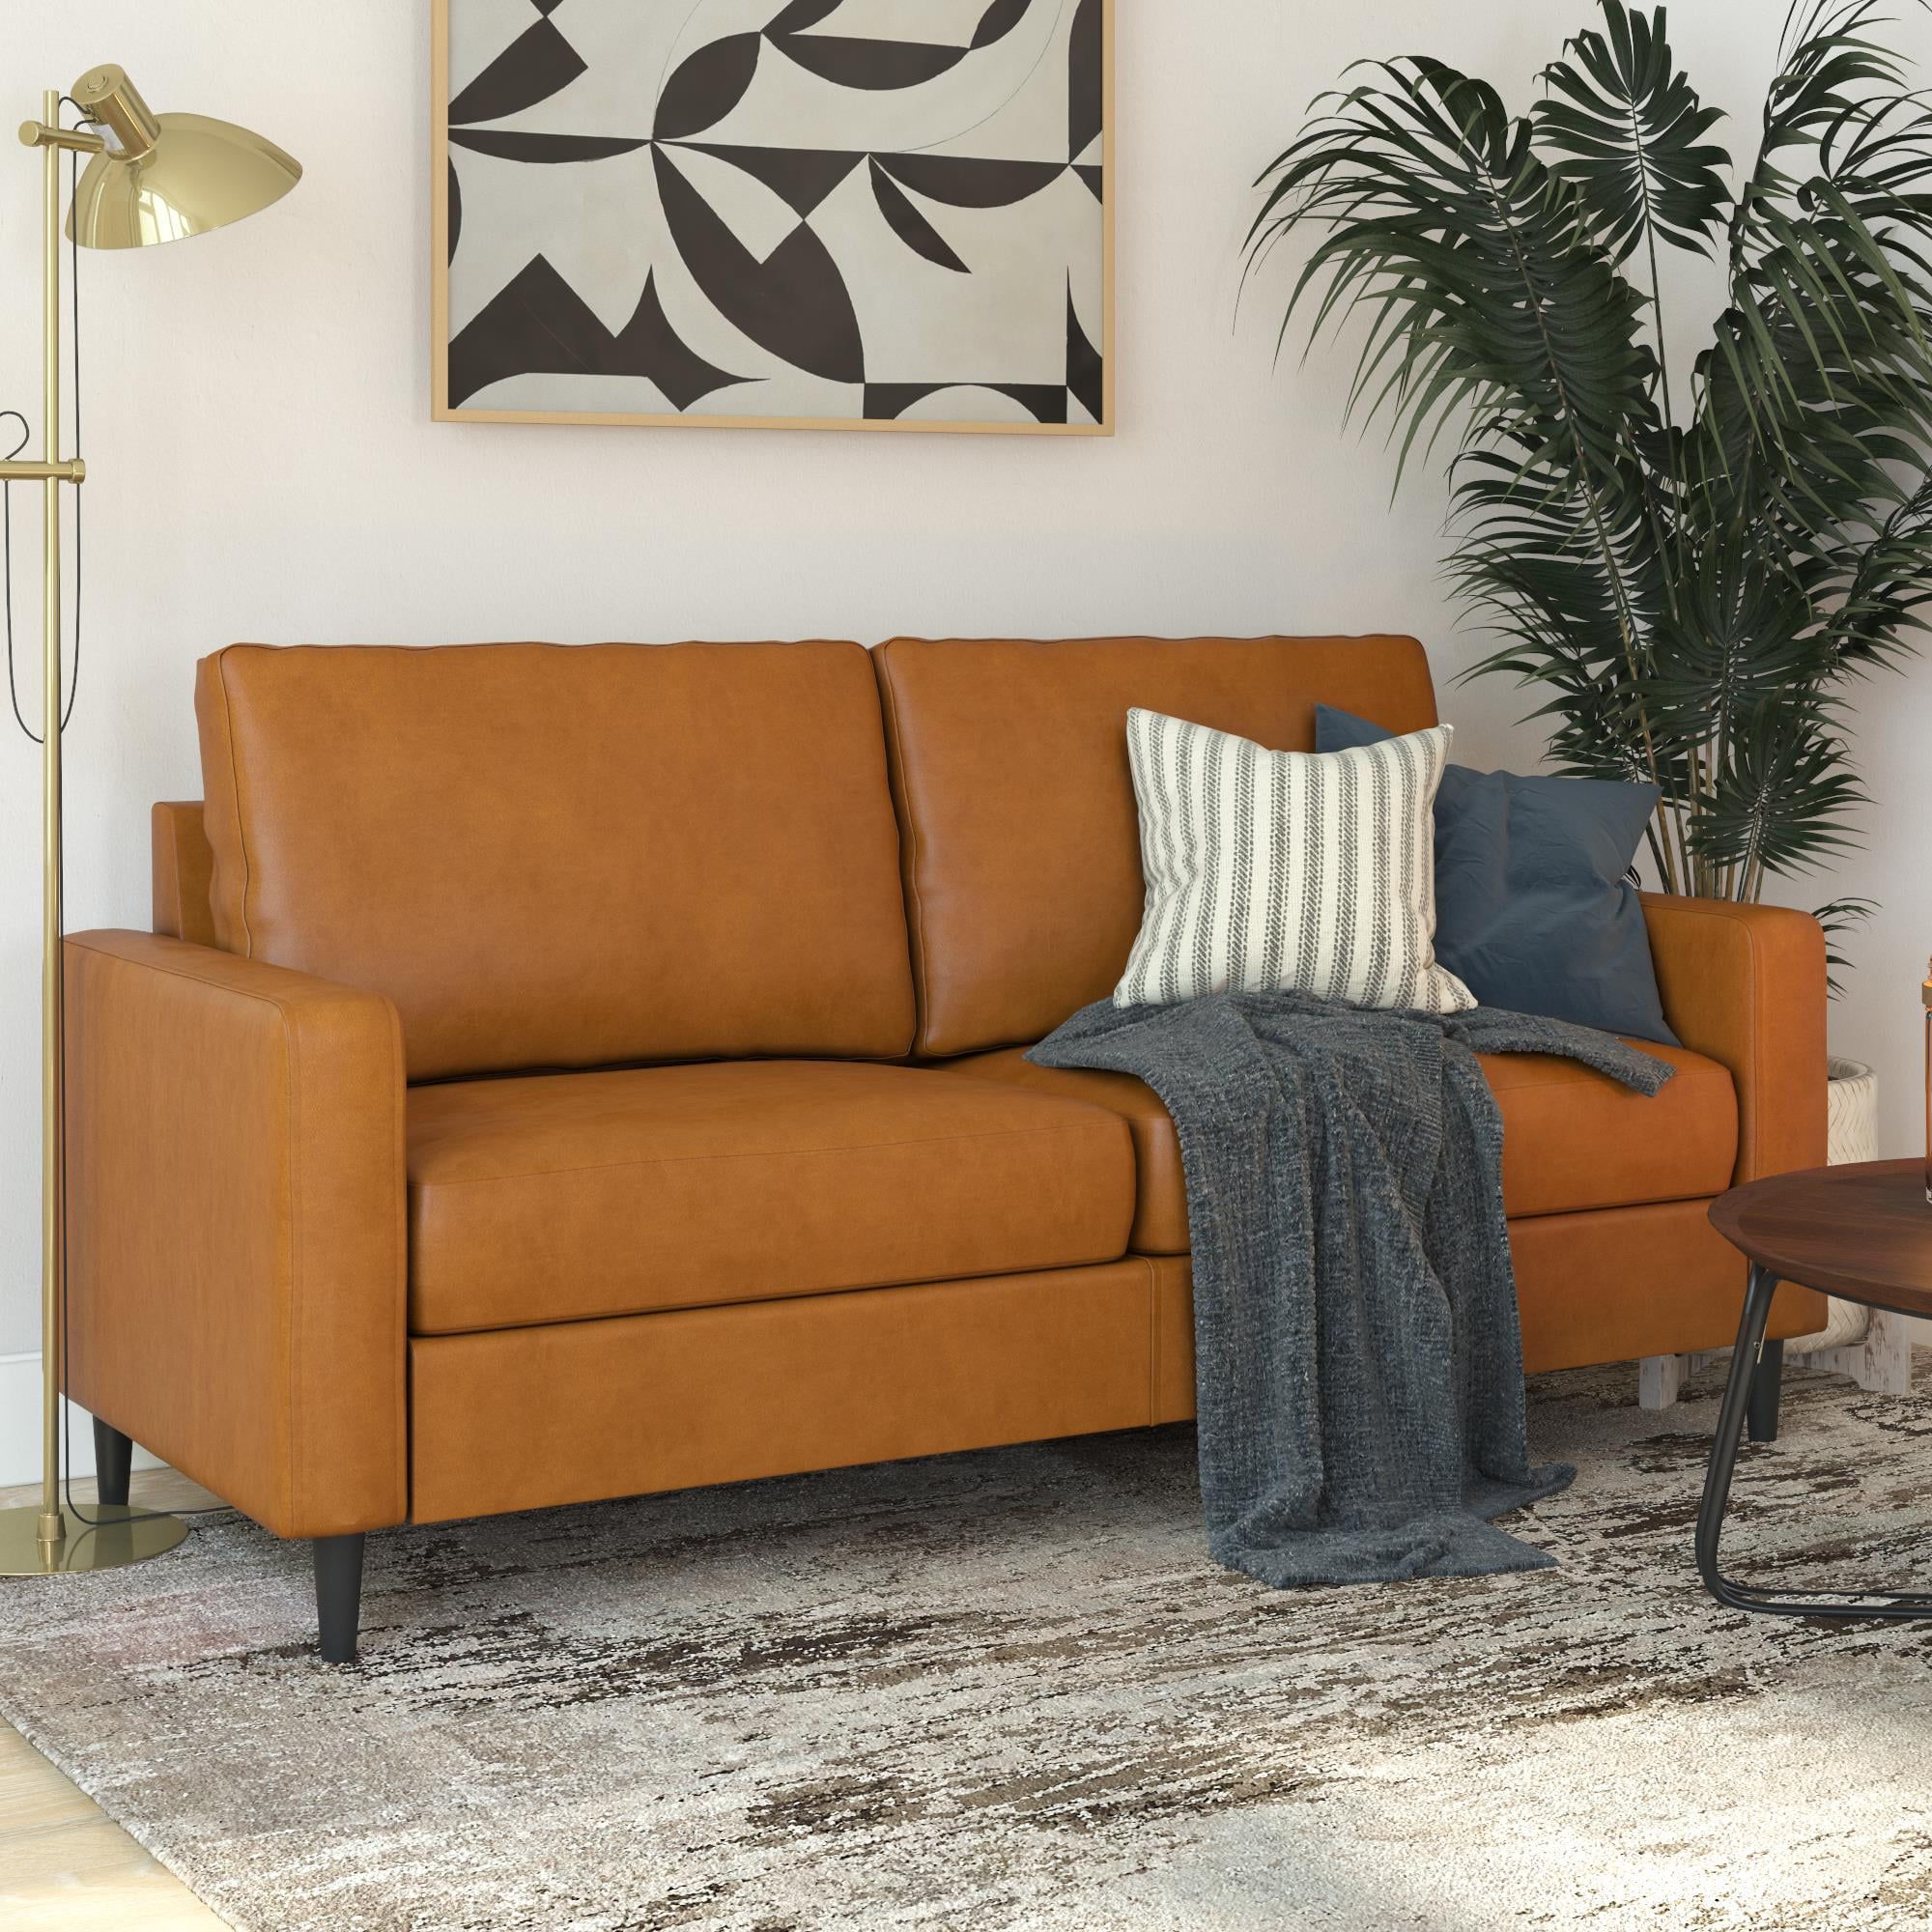 Newest Dhp Connor Modern Sofa, Small Space Living Room Furniture, Camel Faux Throughout Sofas For Small Spaces (View 10 of 15)